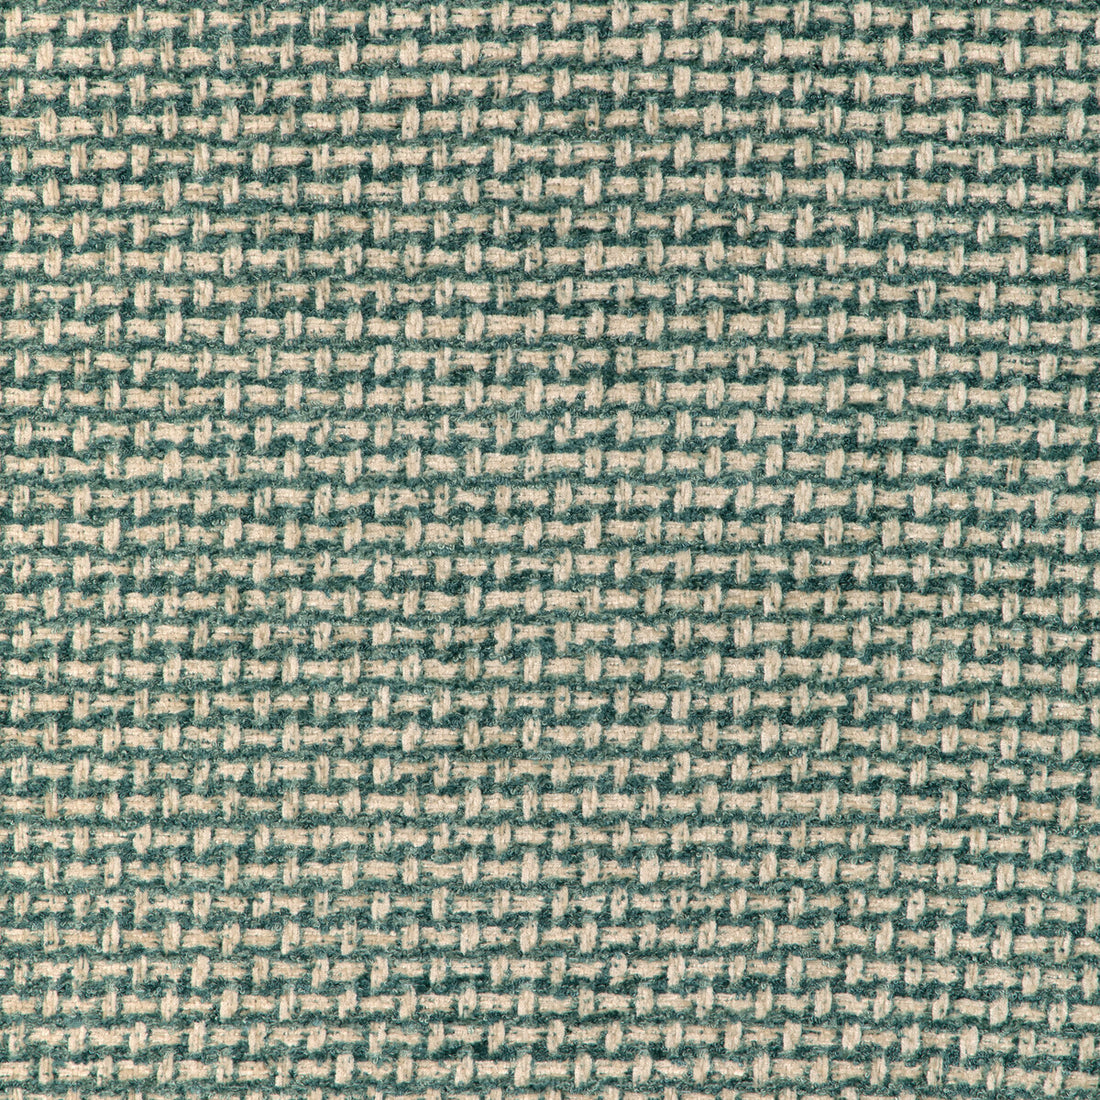 Nivolet Texture fabric in teal color - pattern 8023154.13.0 - by Brunschwig &amp; Fils in the Chambery Textures IV collection